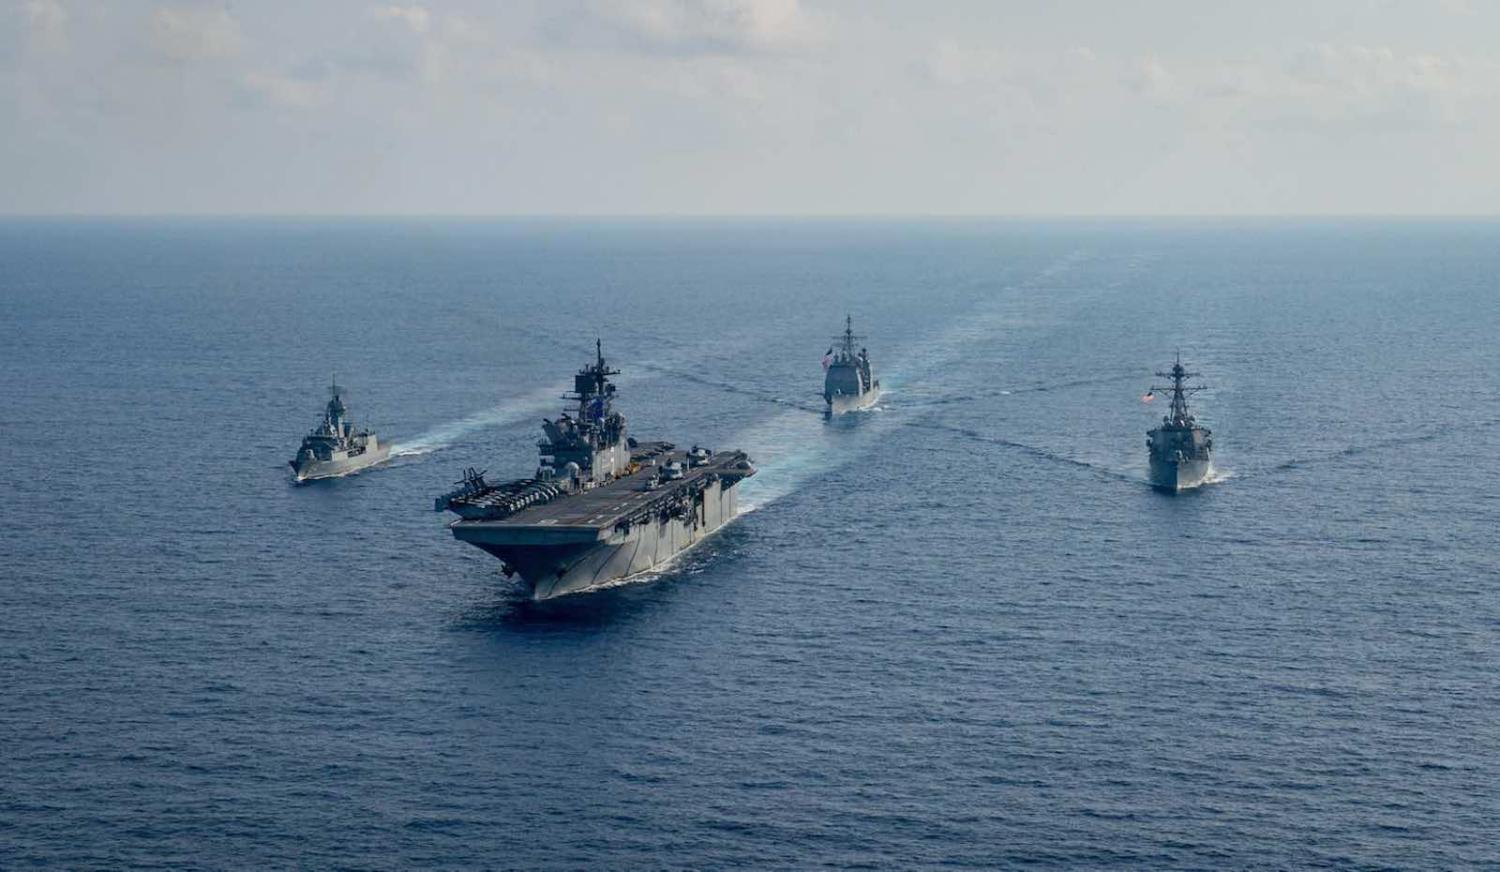 Joint Australian-US naval manoeuvres in the South China Sea, 23 April 2020 (Department of Defence)